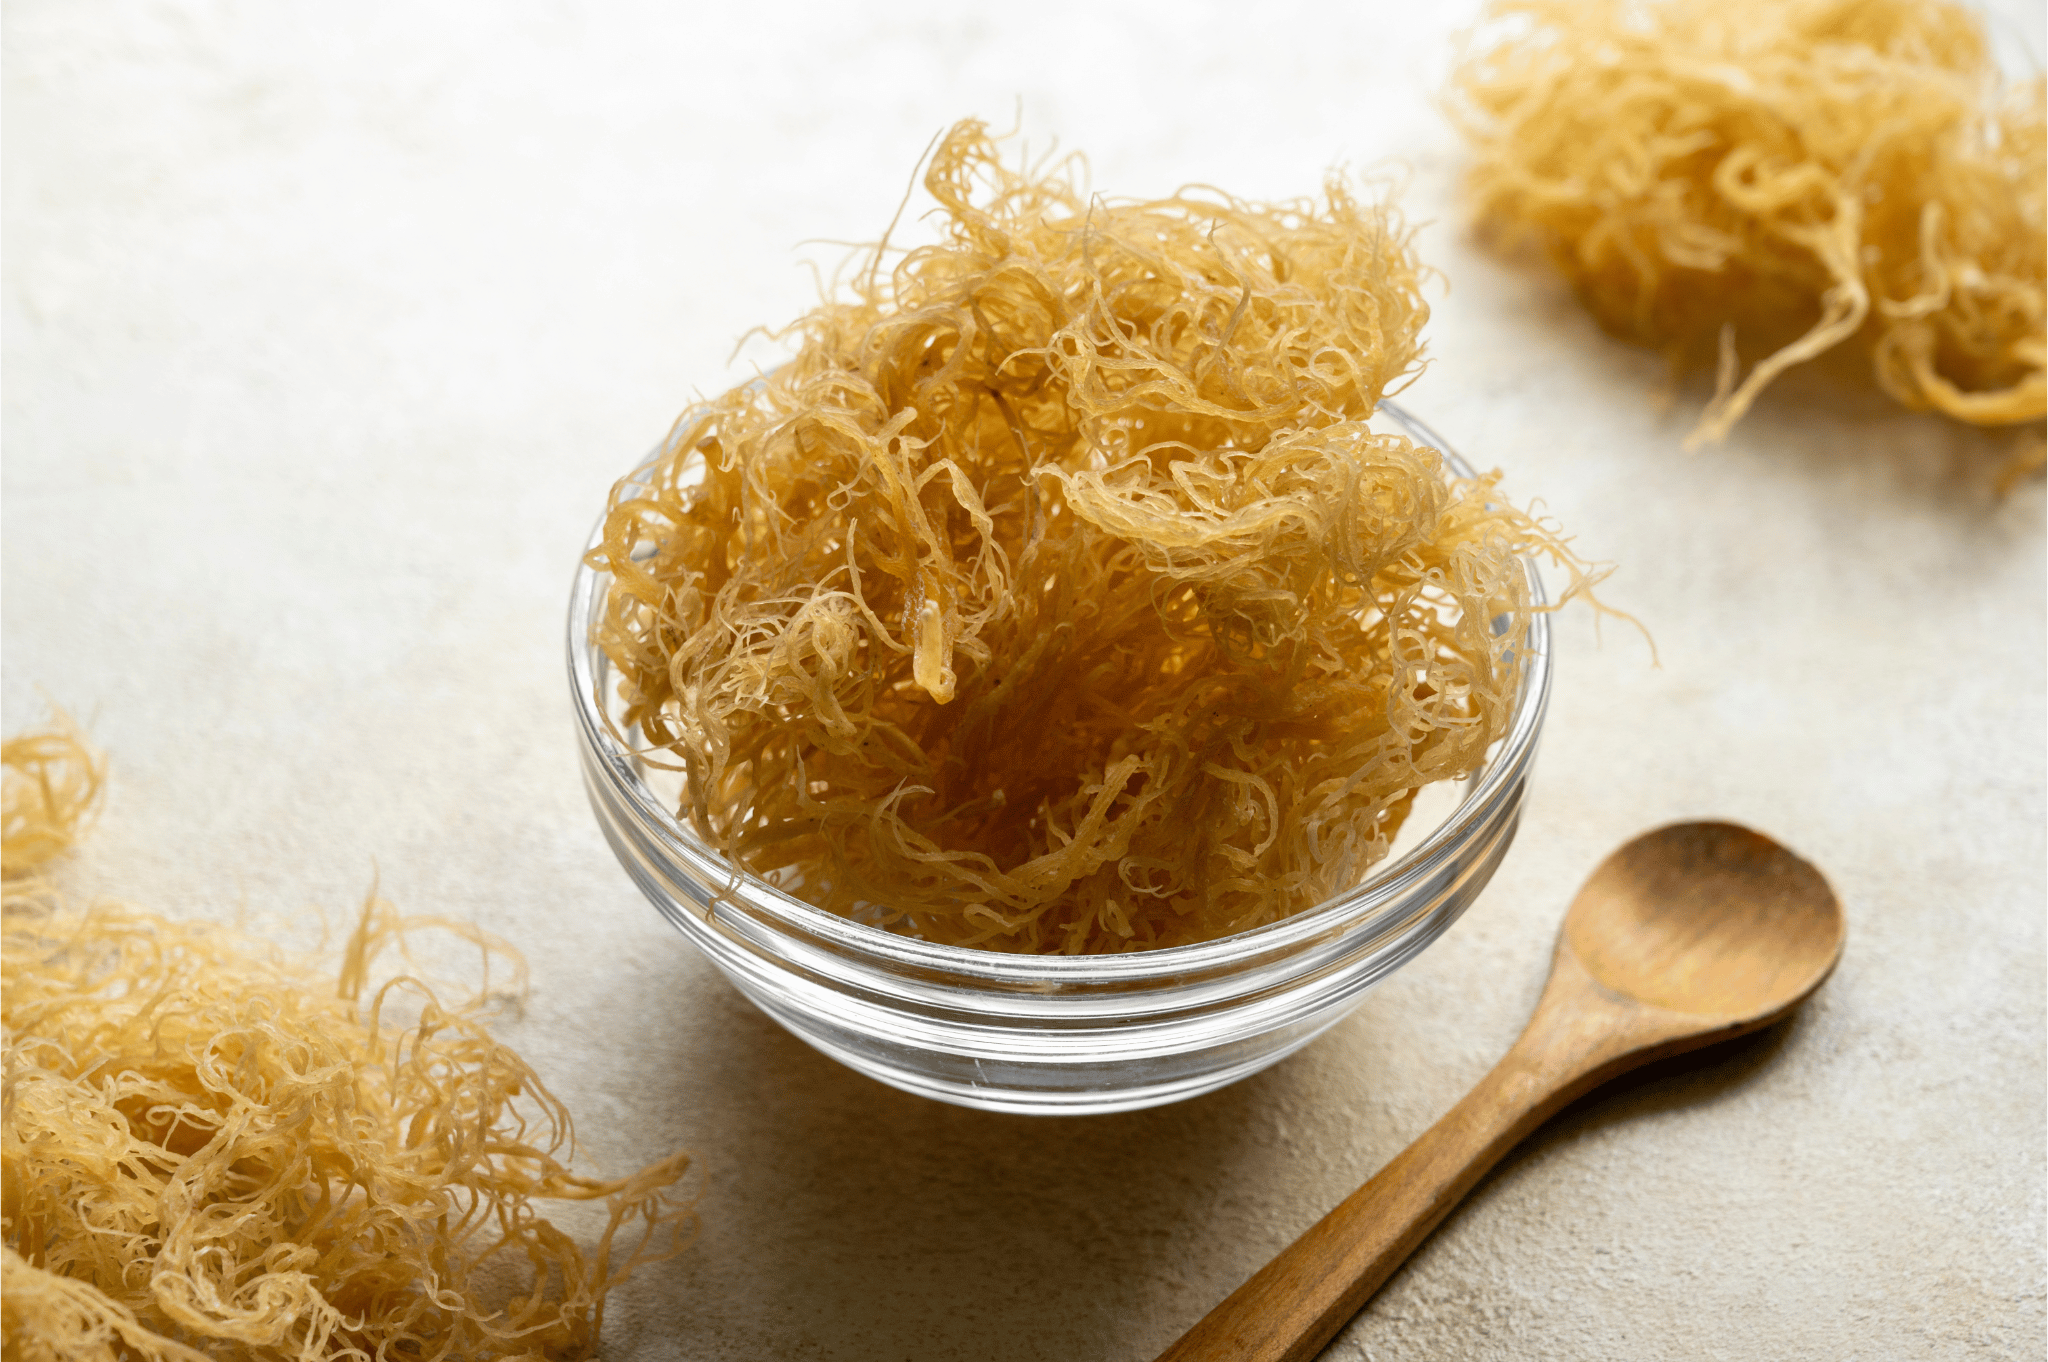 Sea Moss DIY: A Step-By-Step Guide On How To Make Sea Moss Gel At Home!